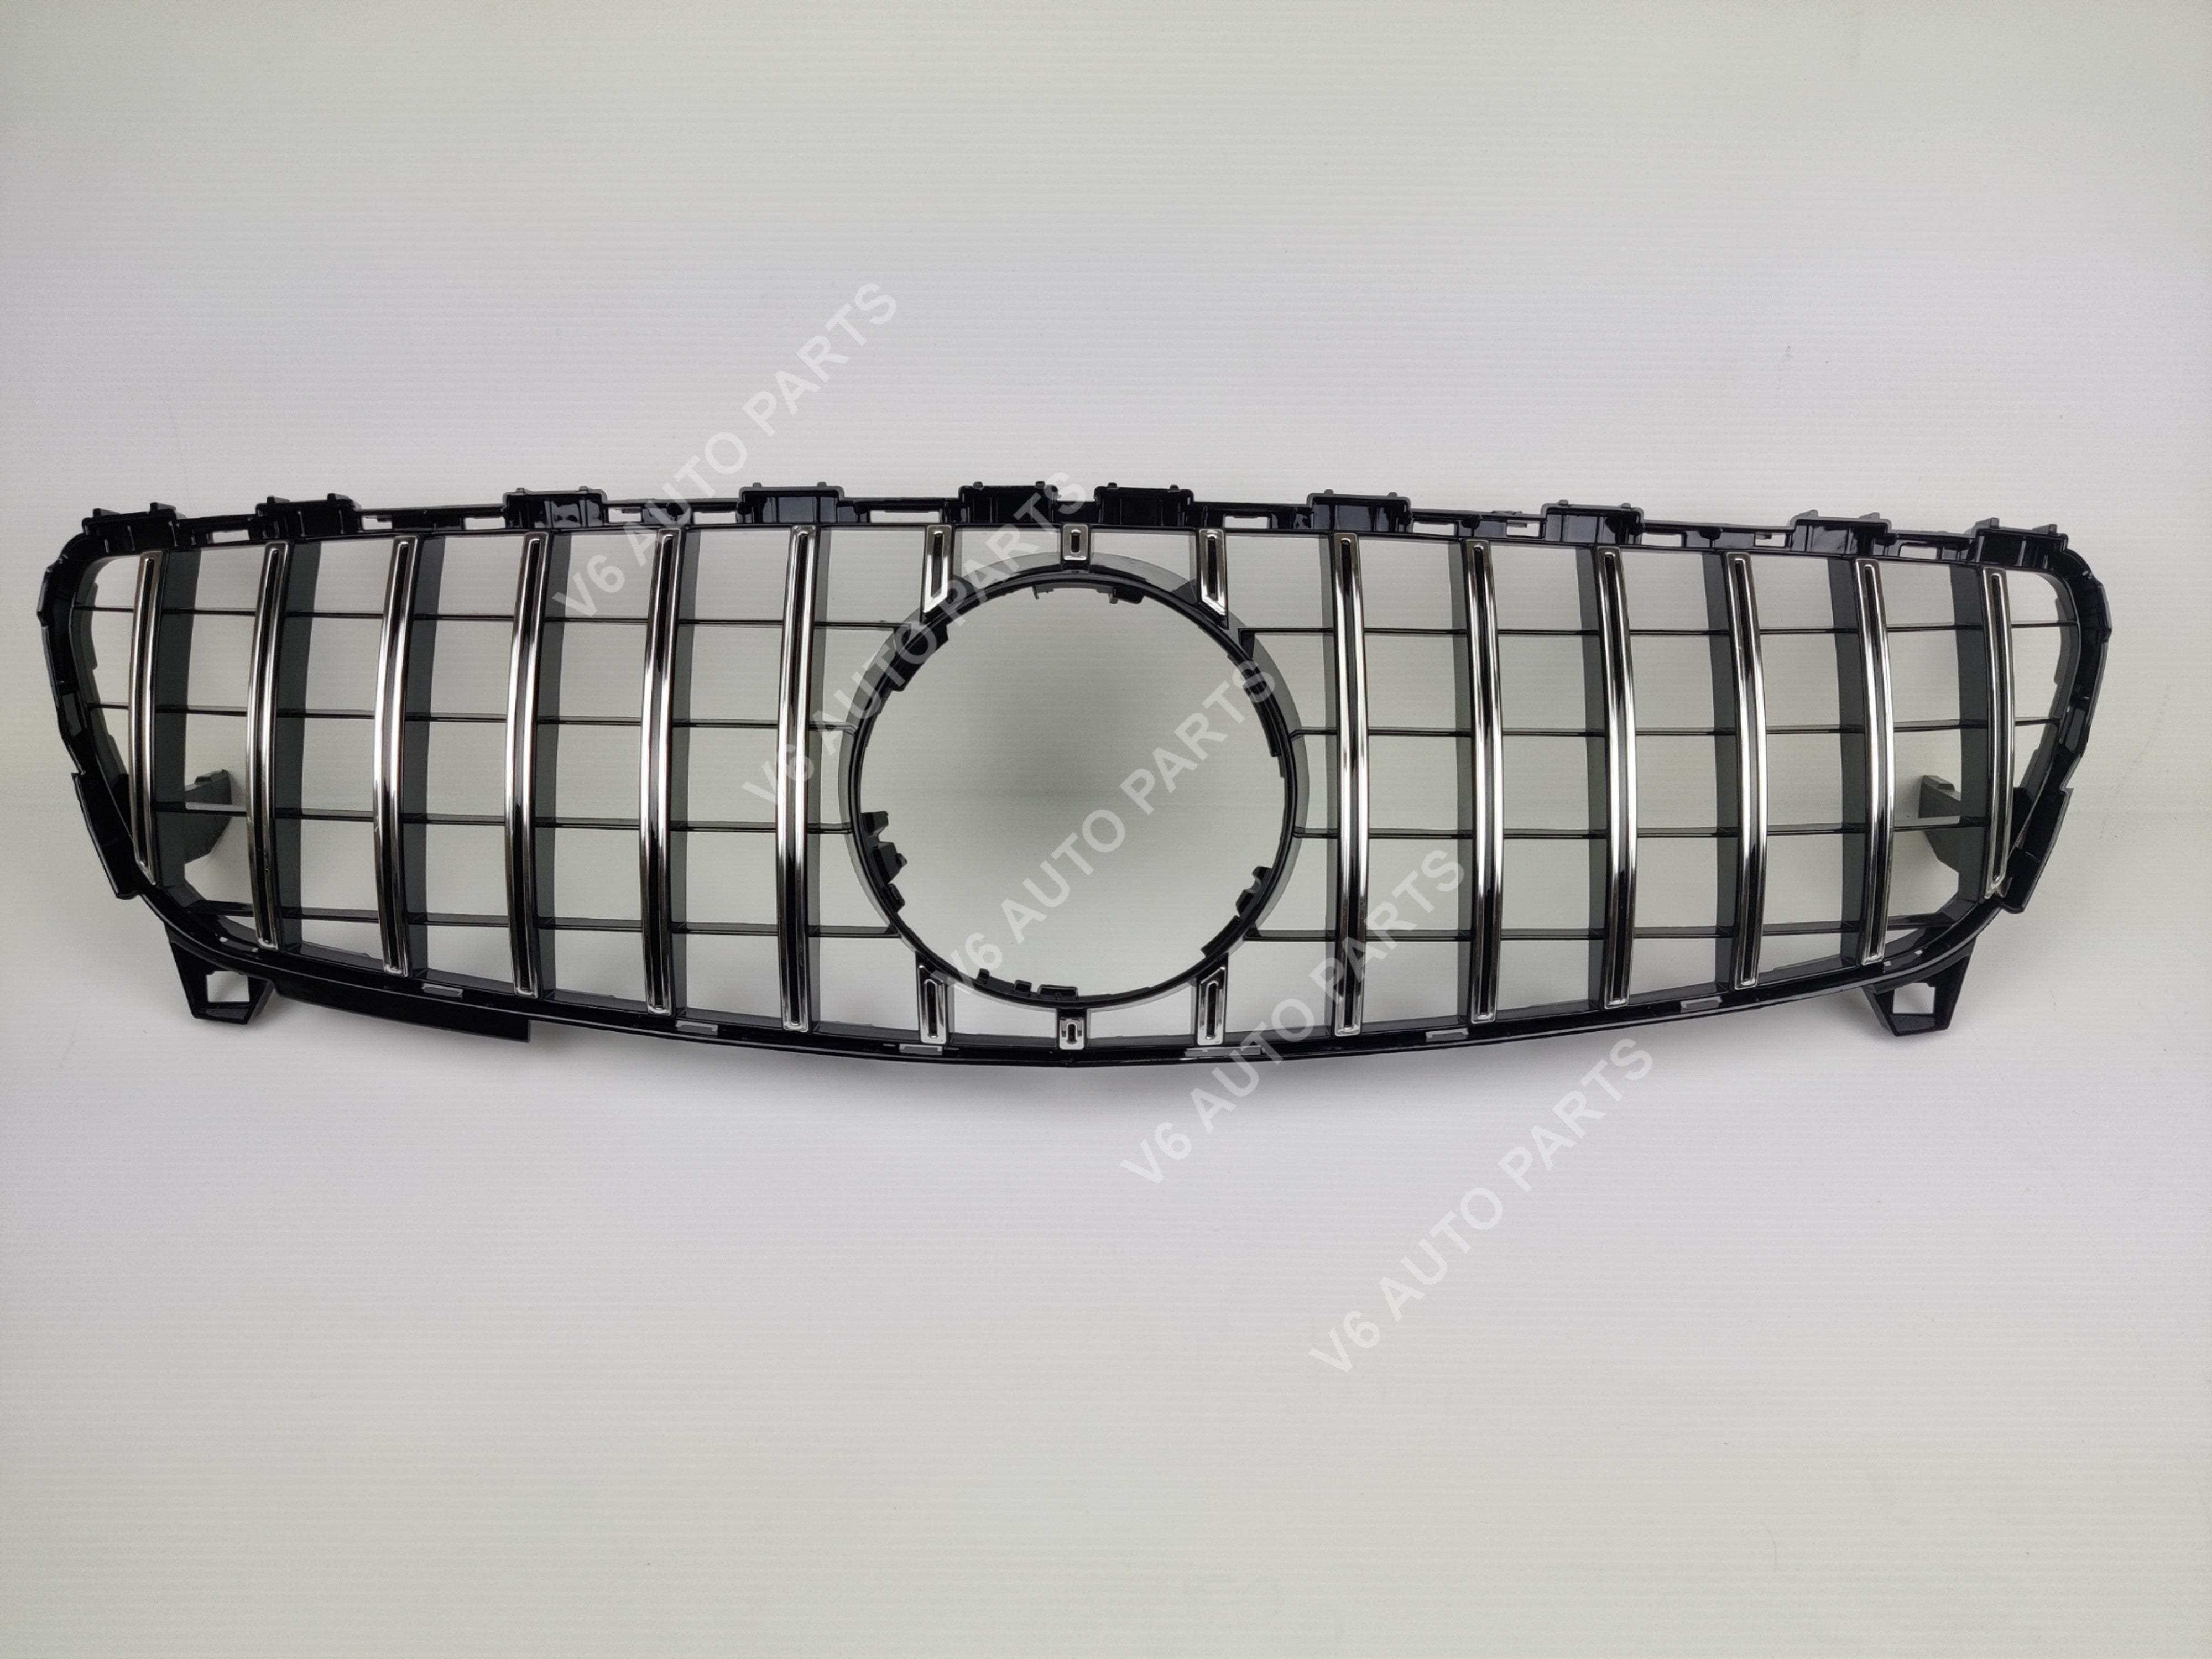 For Mercedes A-Class A176 A200 A220 Grill Front Bumper GT AMG A45 Grille 2015-18